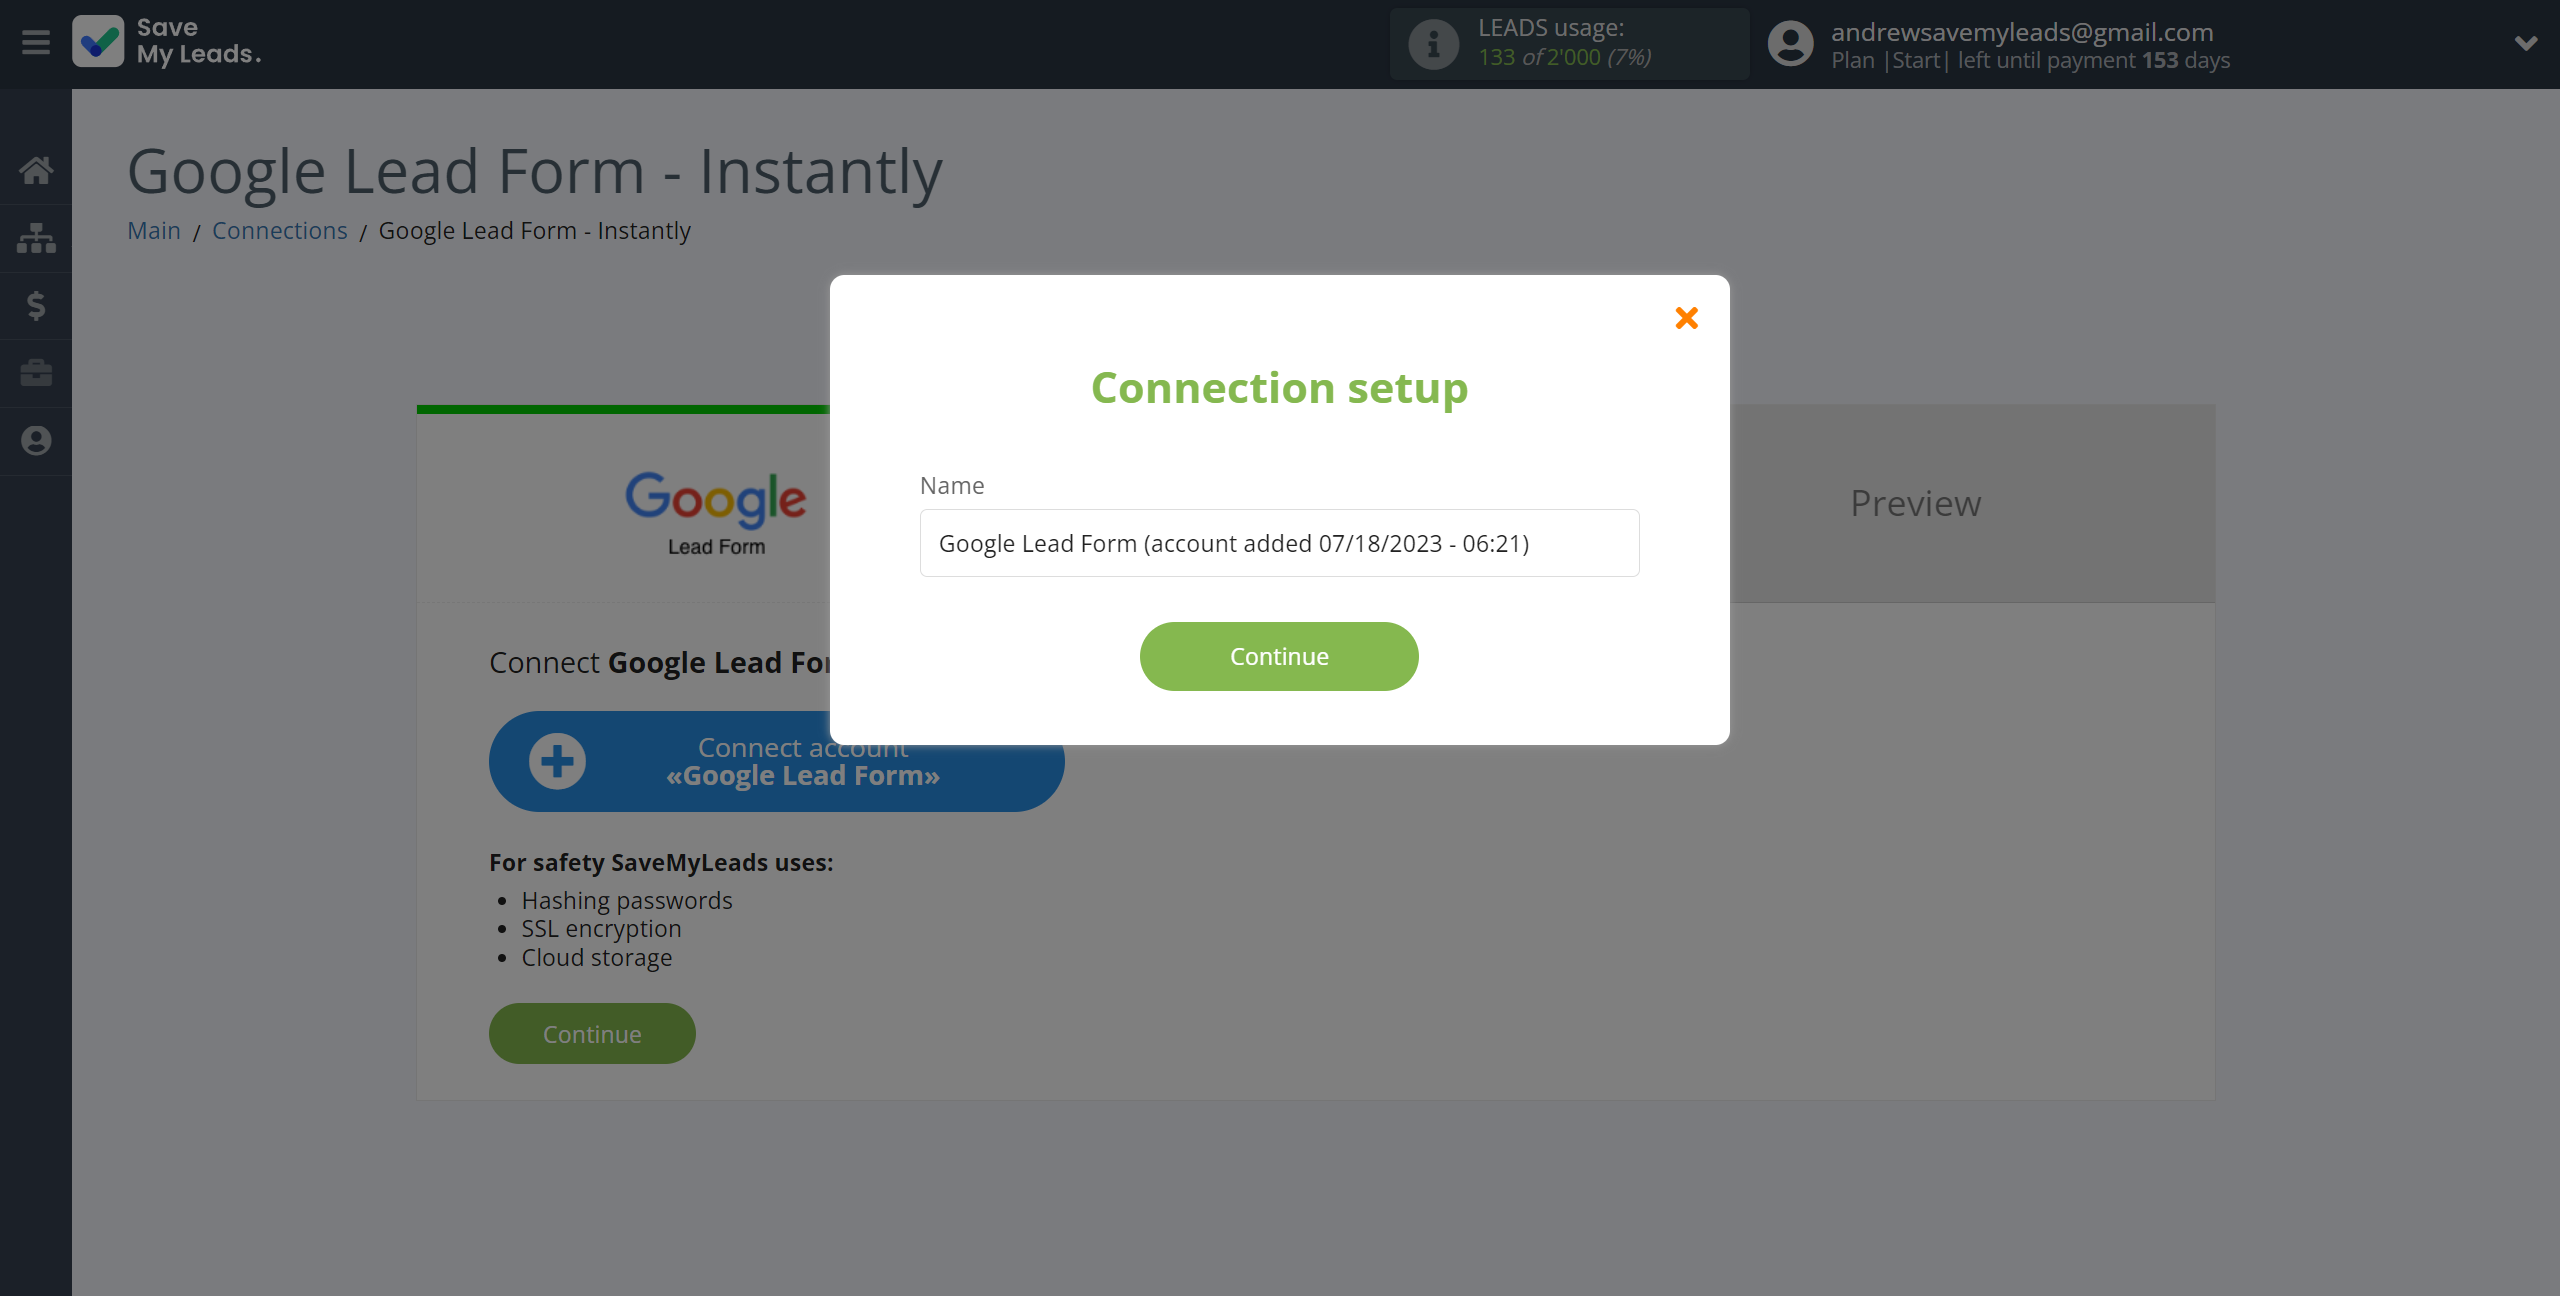 How to Connect Google Lead Form with Instantly Add lead to campaign | Data Source account connection